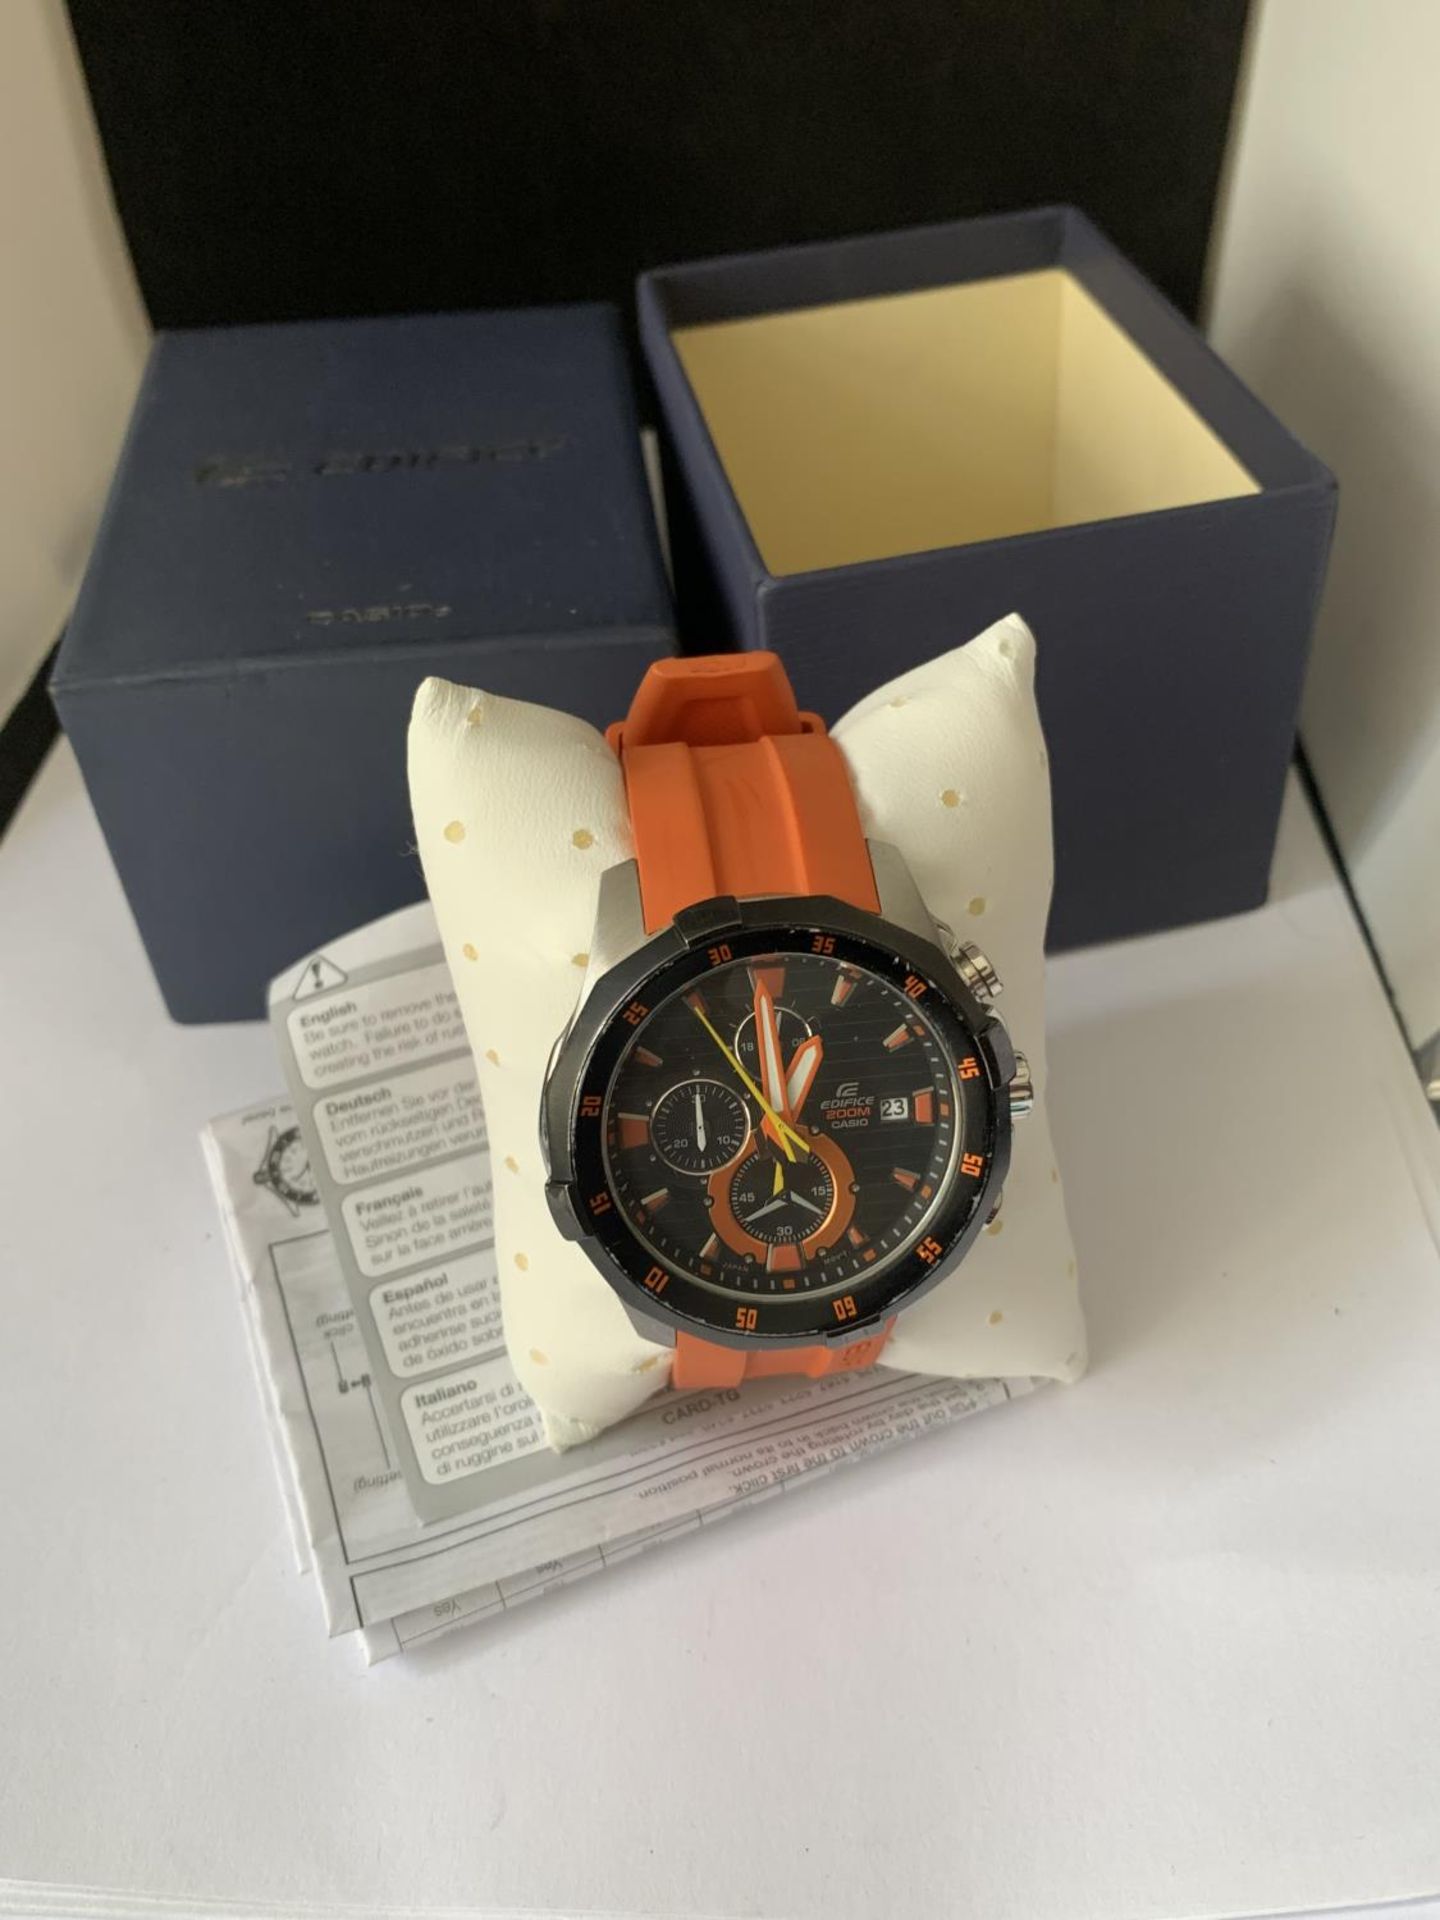 AN AS NEW AND BOXED CASIO EDIFICE DIVER CHRONOGRAPH WRIST WATCH SEEN WORKING BUT NO WARRANTY